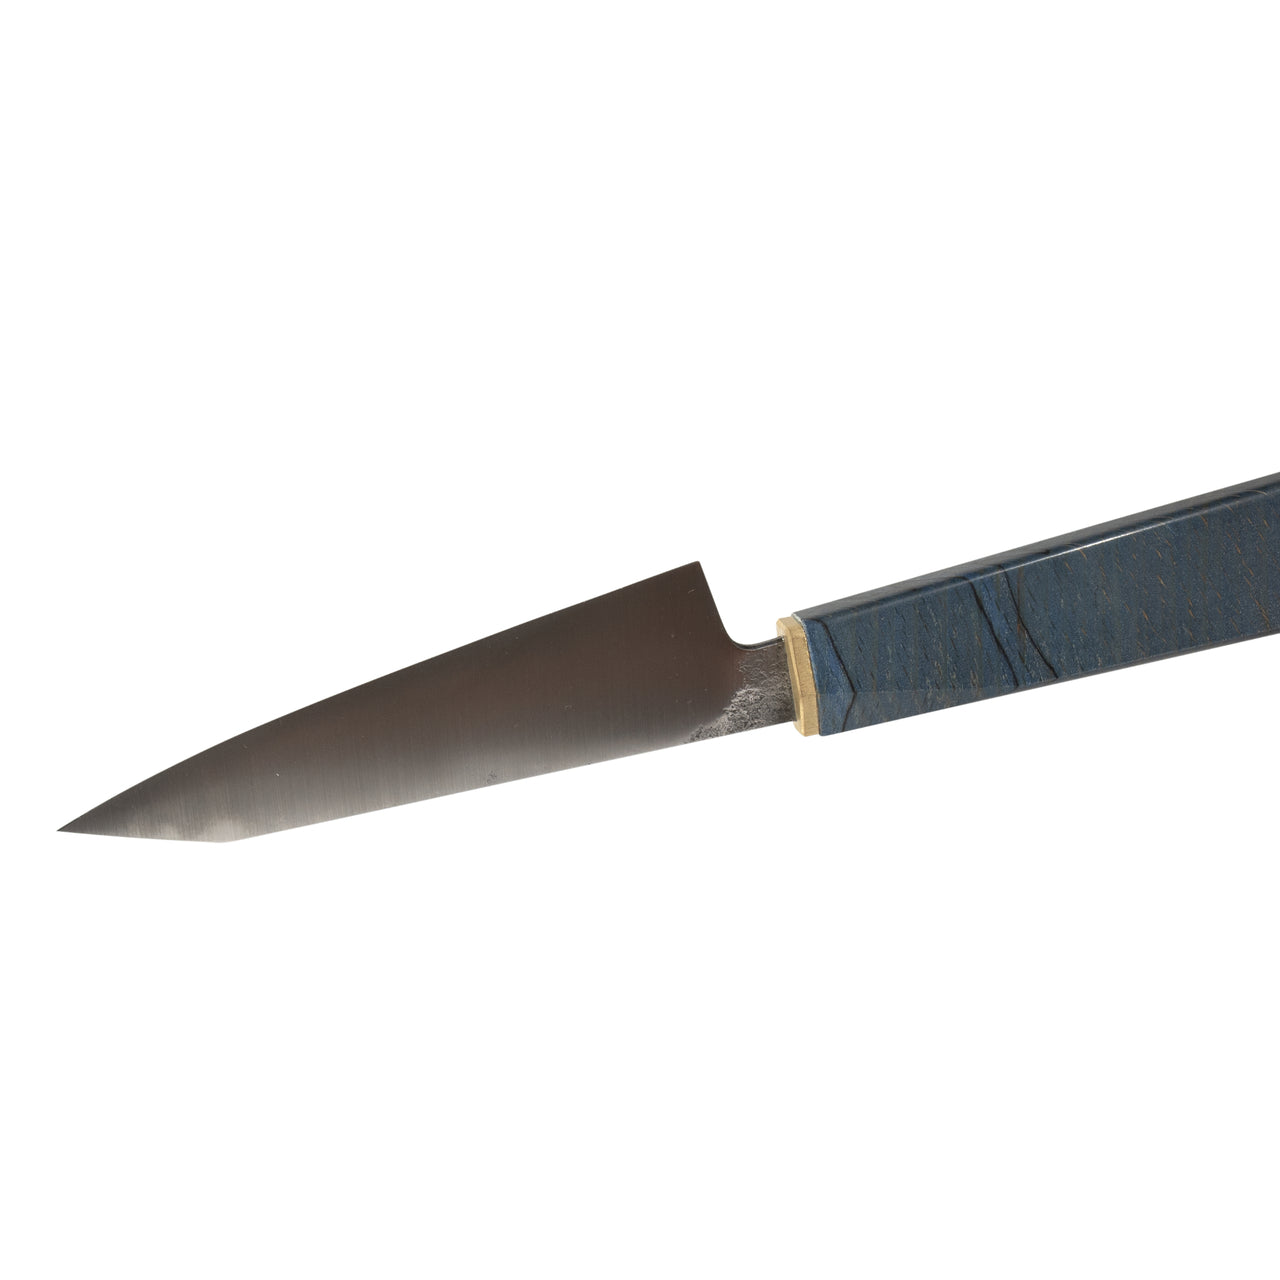 Oliver Märtens Petty 100mm with Stabilised Beech & Brass Bolster Handle - Profile